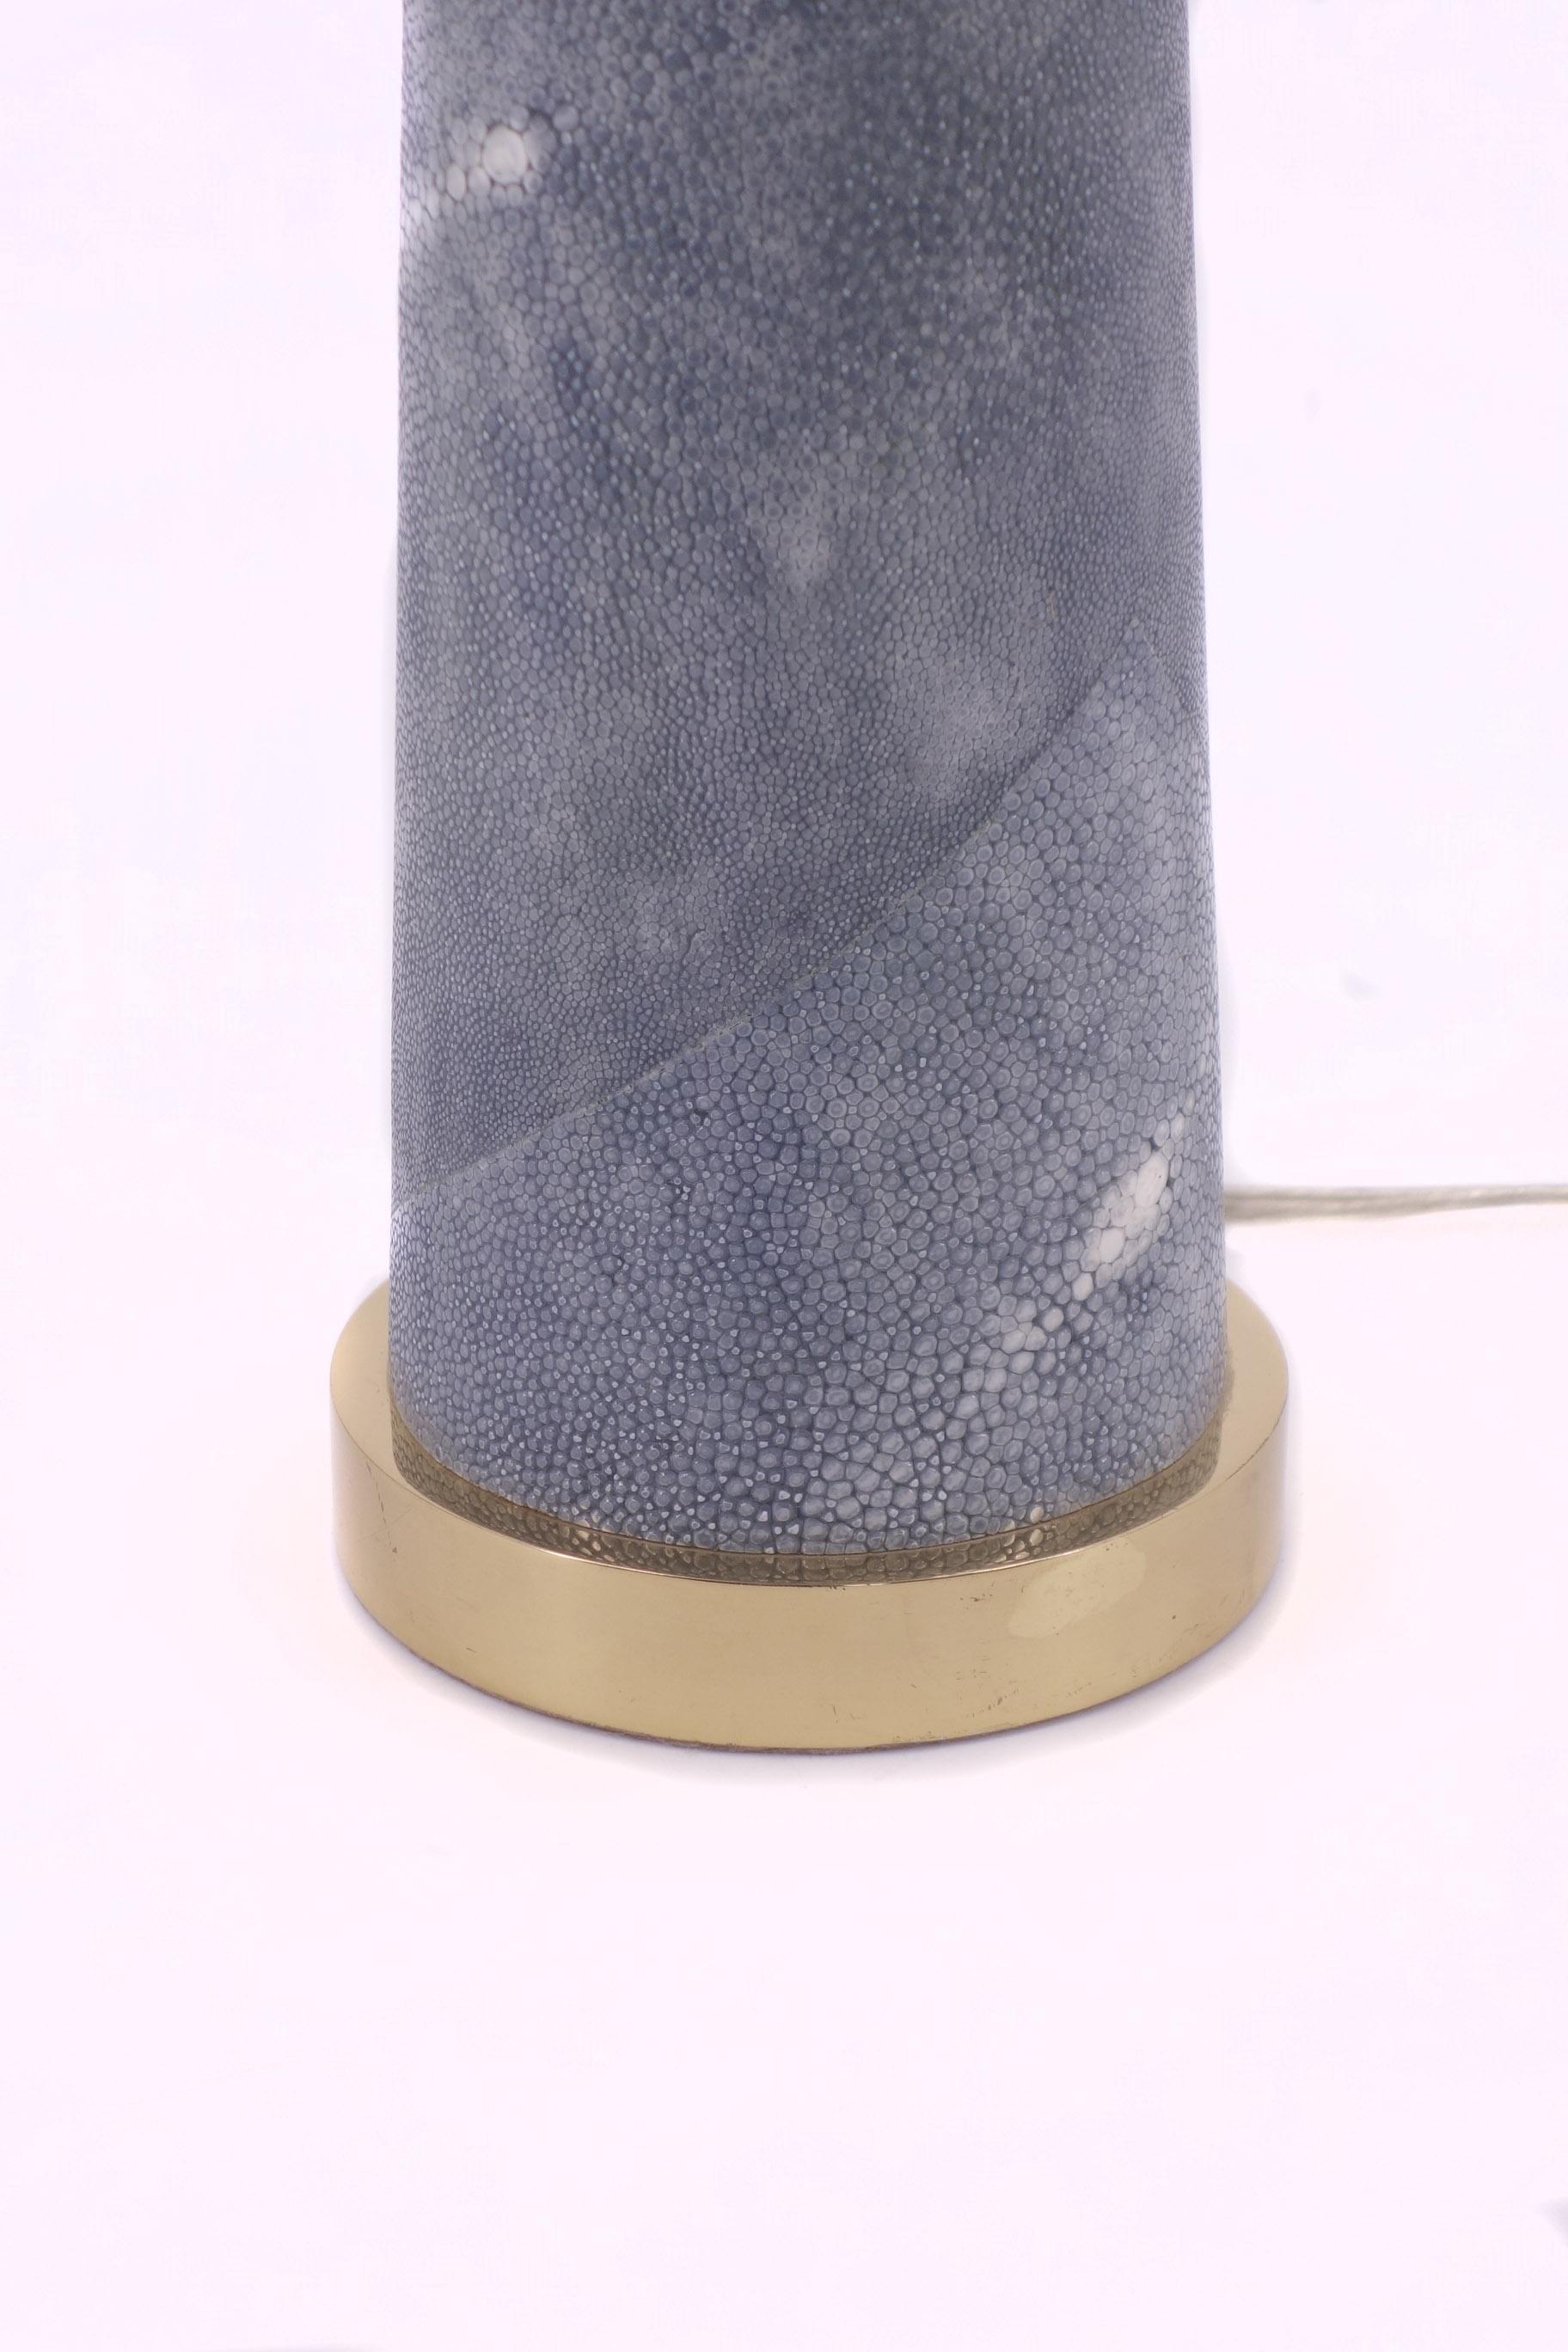 ‘Lighthouse’ table lamp designed by Karl Springer.
This cone shaped lamp is covered by Pale Blue Shagreen with brass details.

 